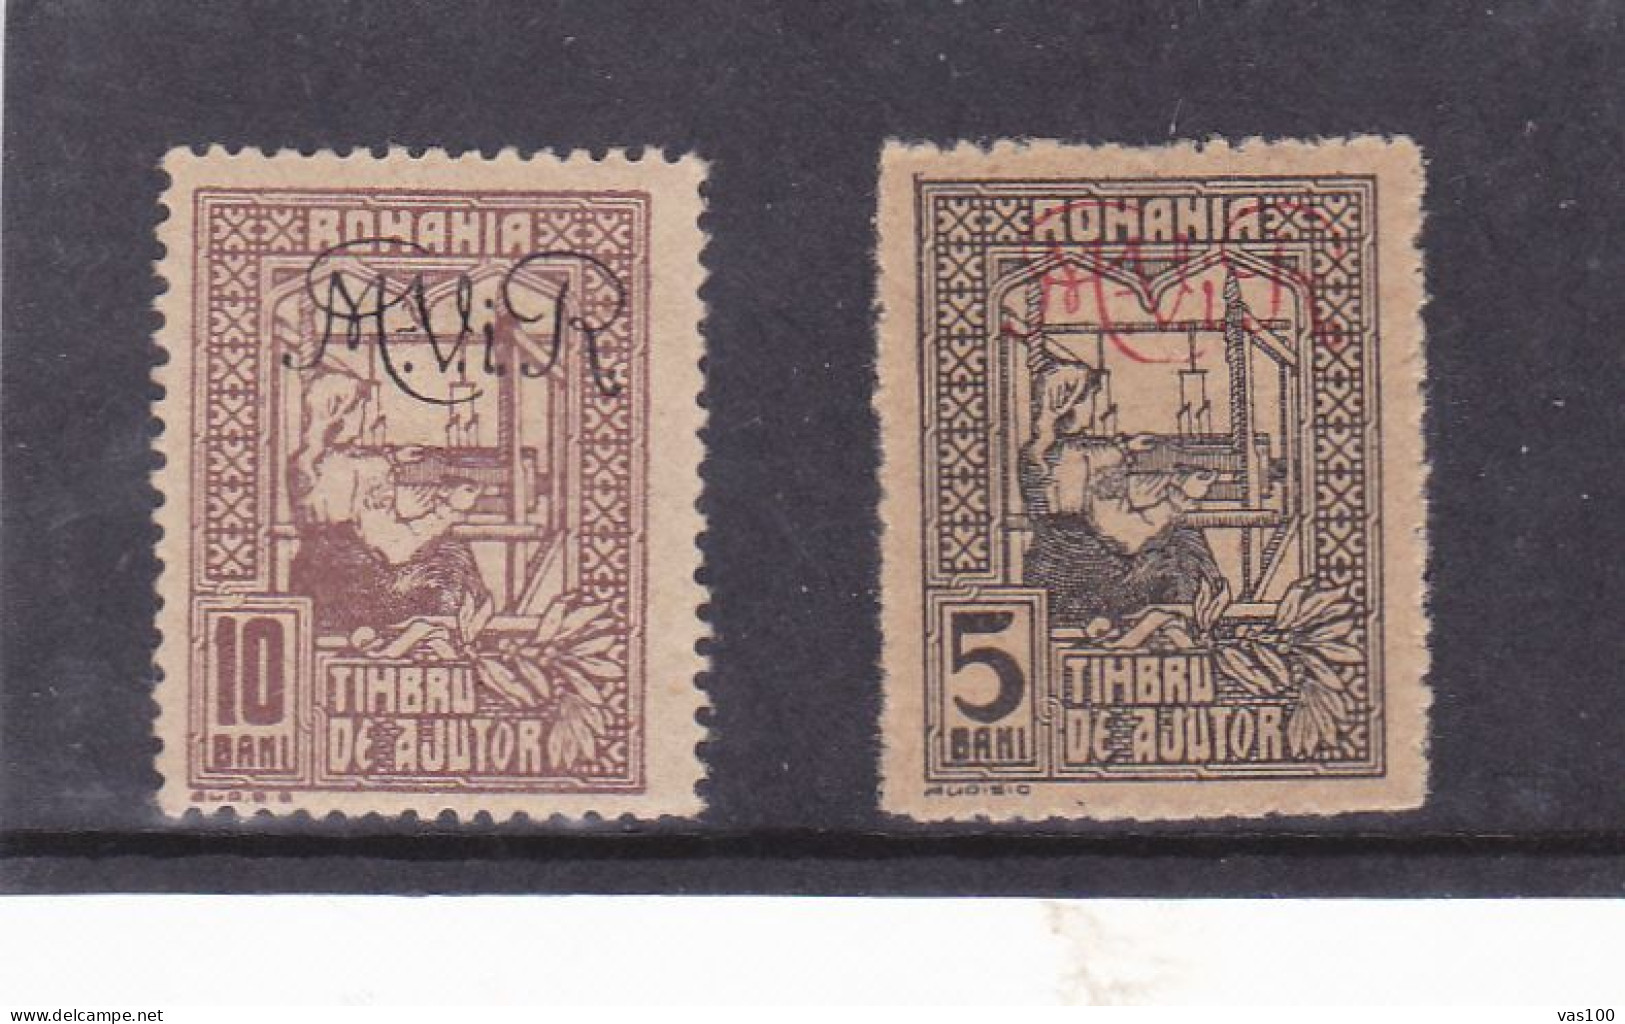 Germany WW1 Occupation In Romania 1917 MViR 5 +10 BANI 2 STAMPS POSTAGE DUE MINT - Occupations